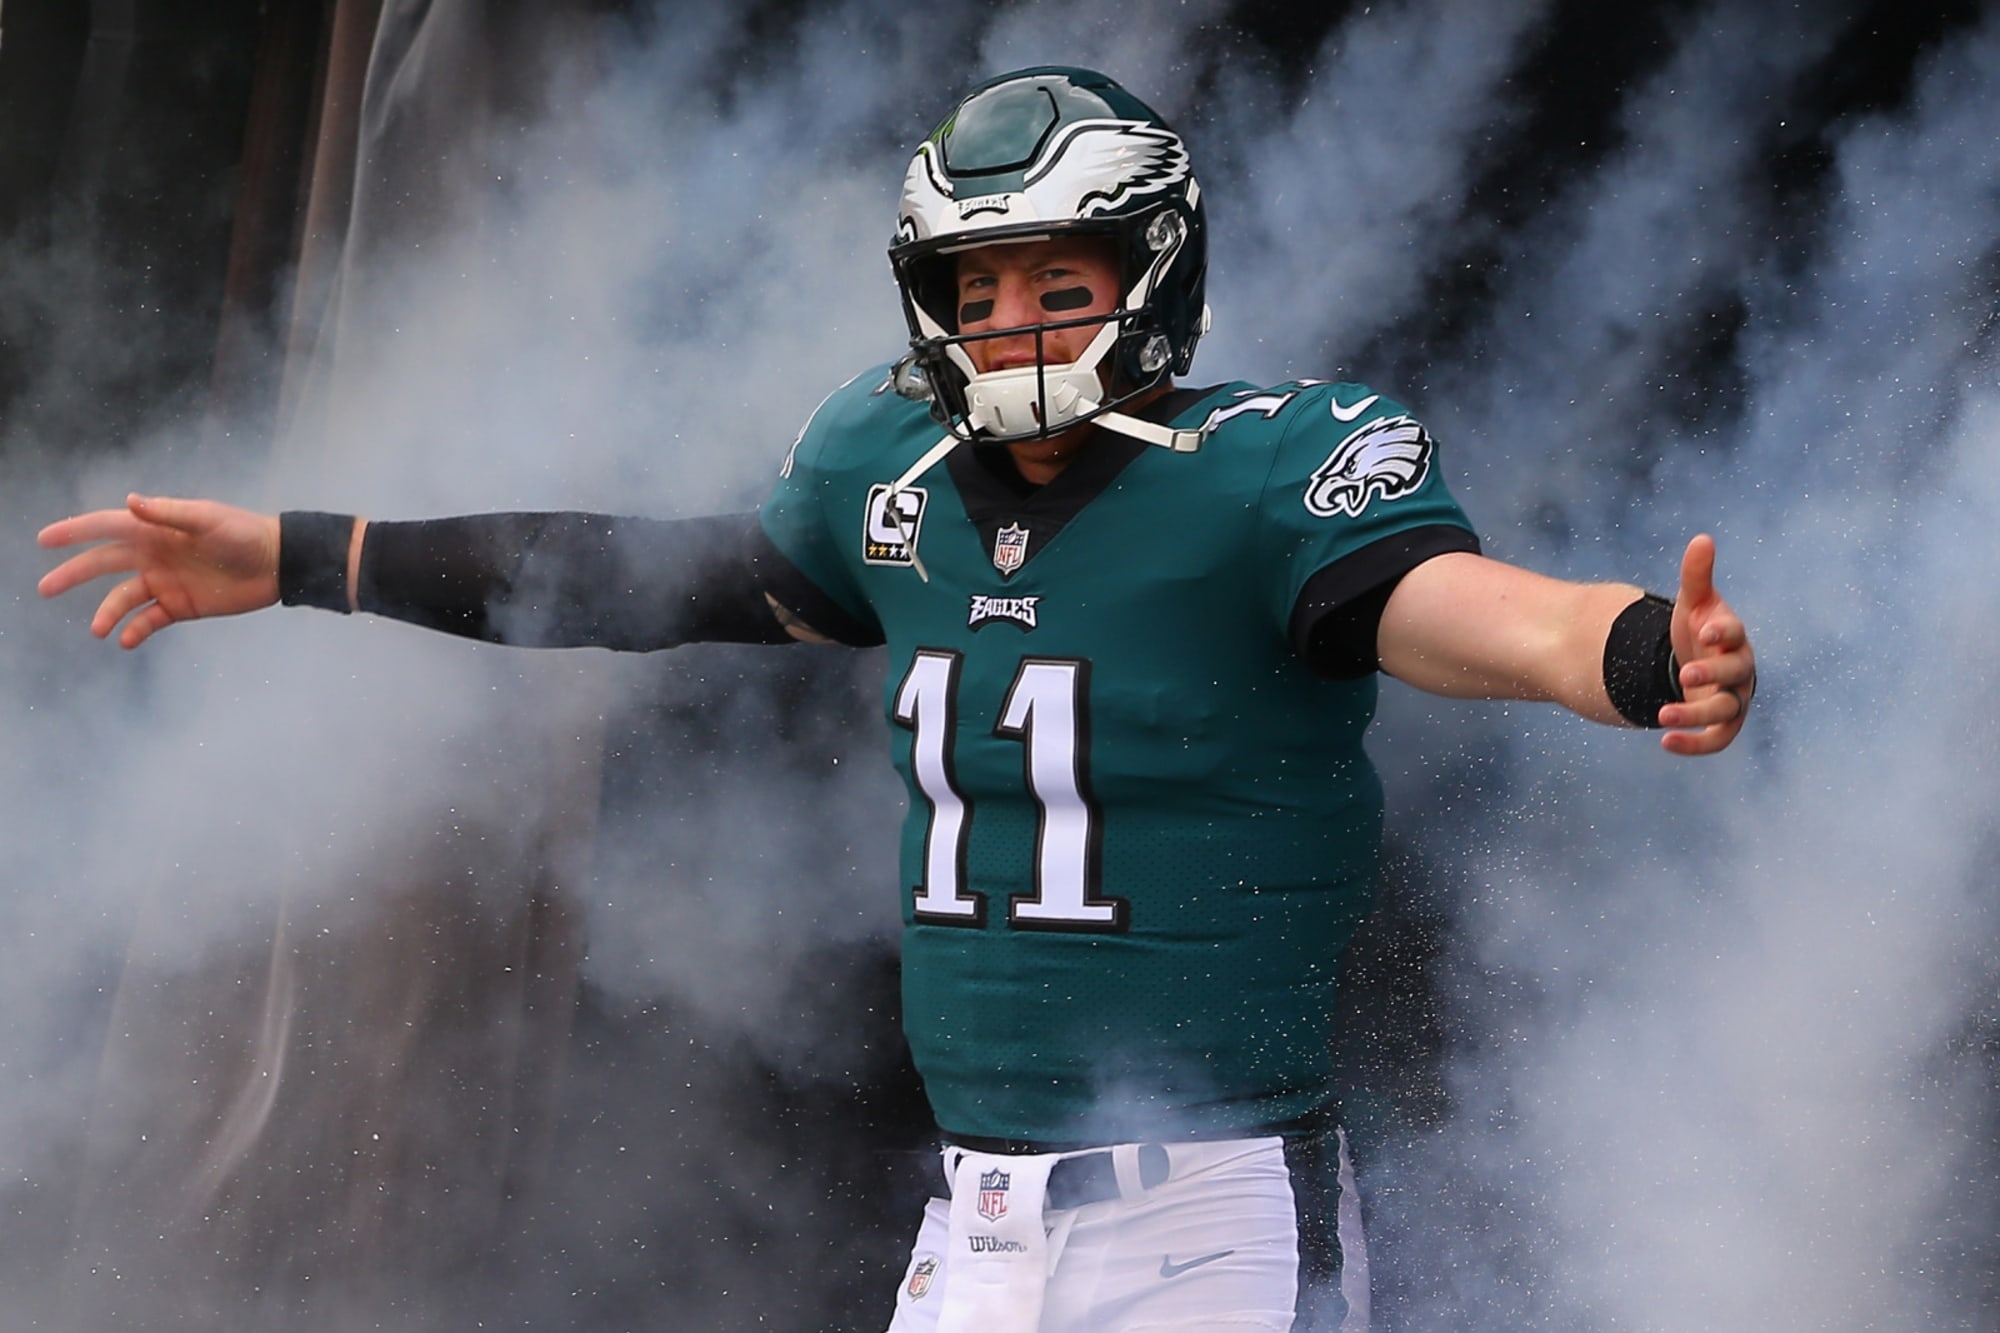 Carson Wentz's jersey was a Top 10 